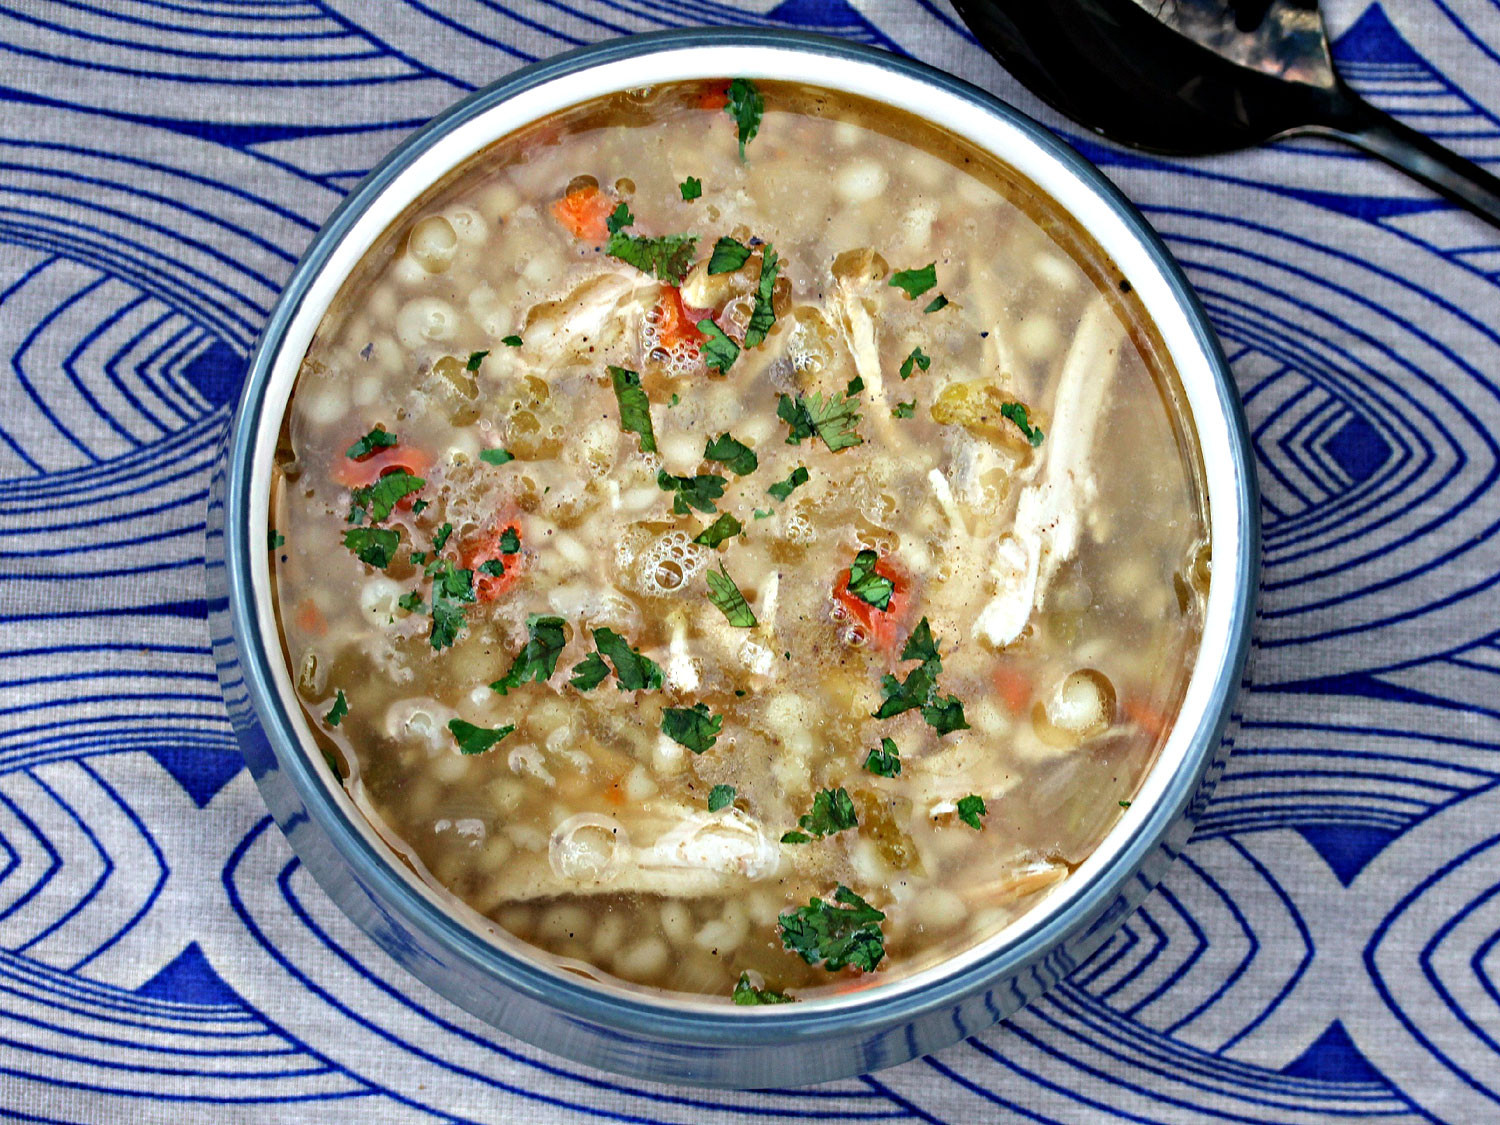 Turkey Soup From Thanksgiving Leftovers
 3 Easy Slow Cooker Recipes for Your Leftover Turkey